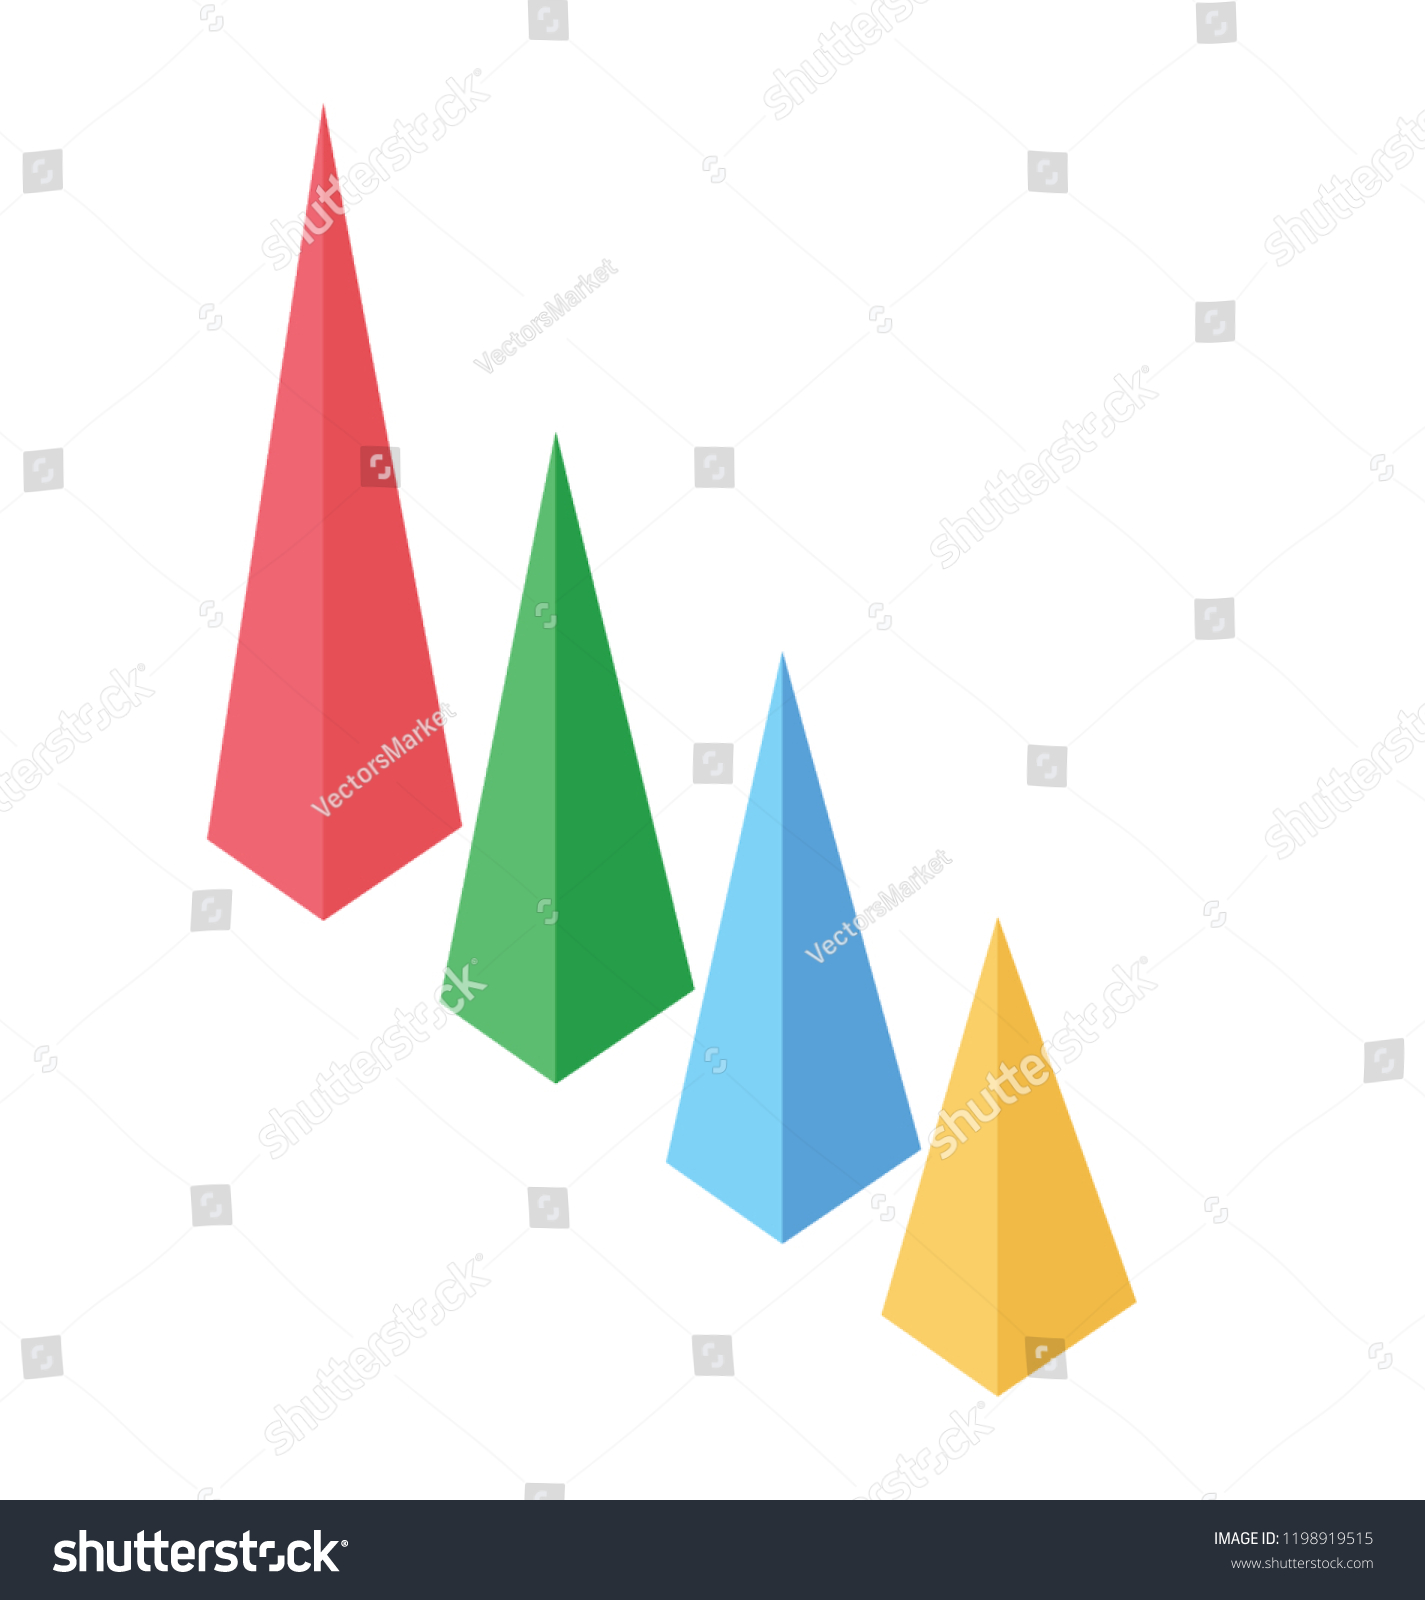 Pyramid Chart Having Triangles Different Shapes Stock Vector (Royalty ...